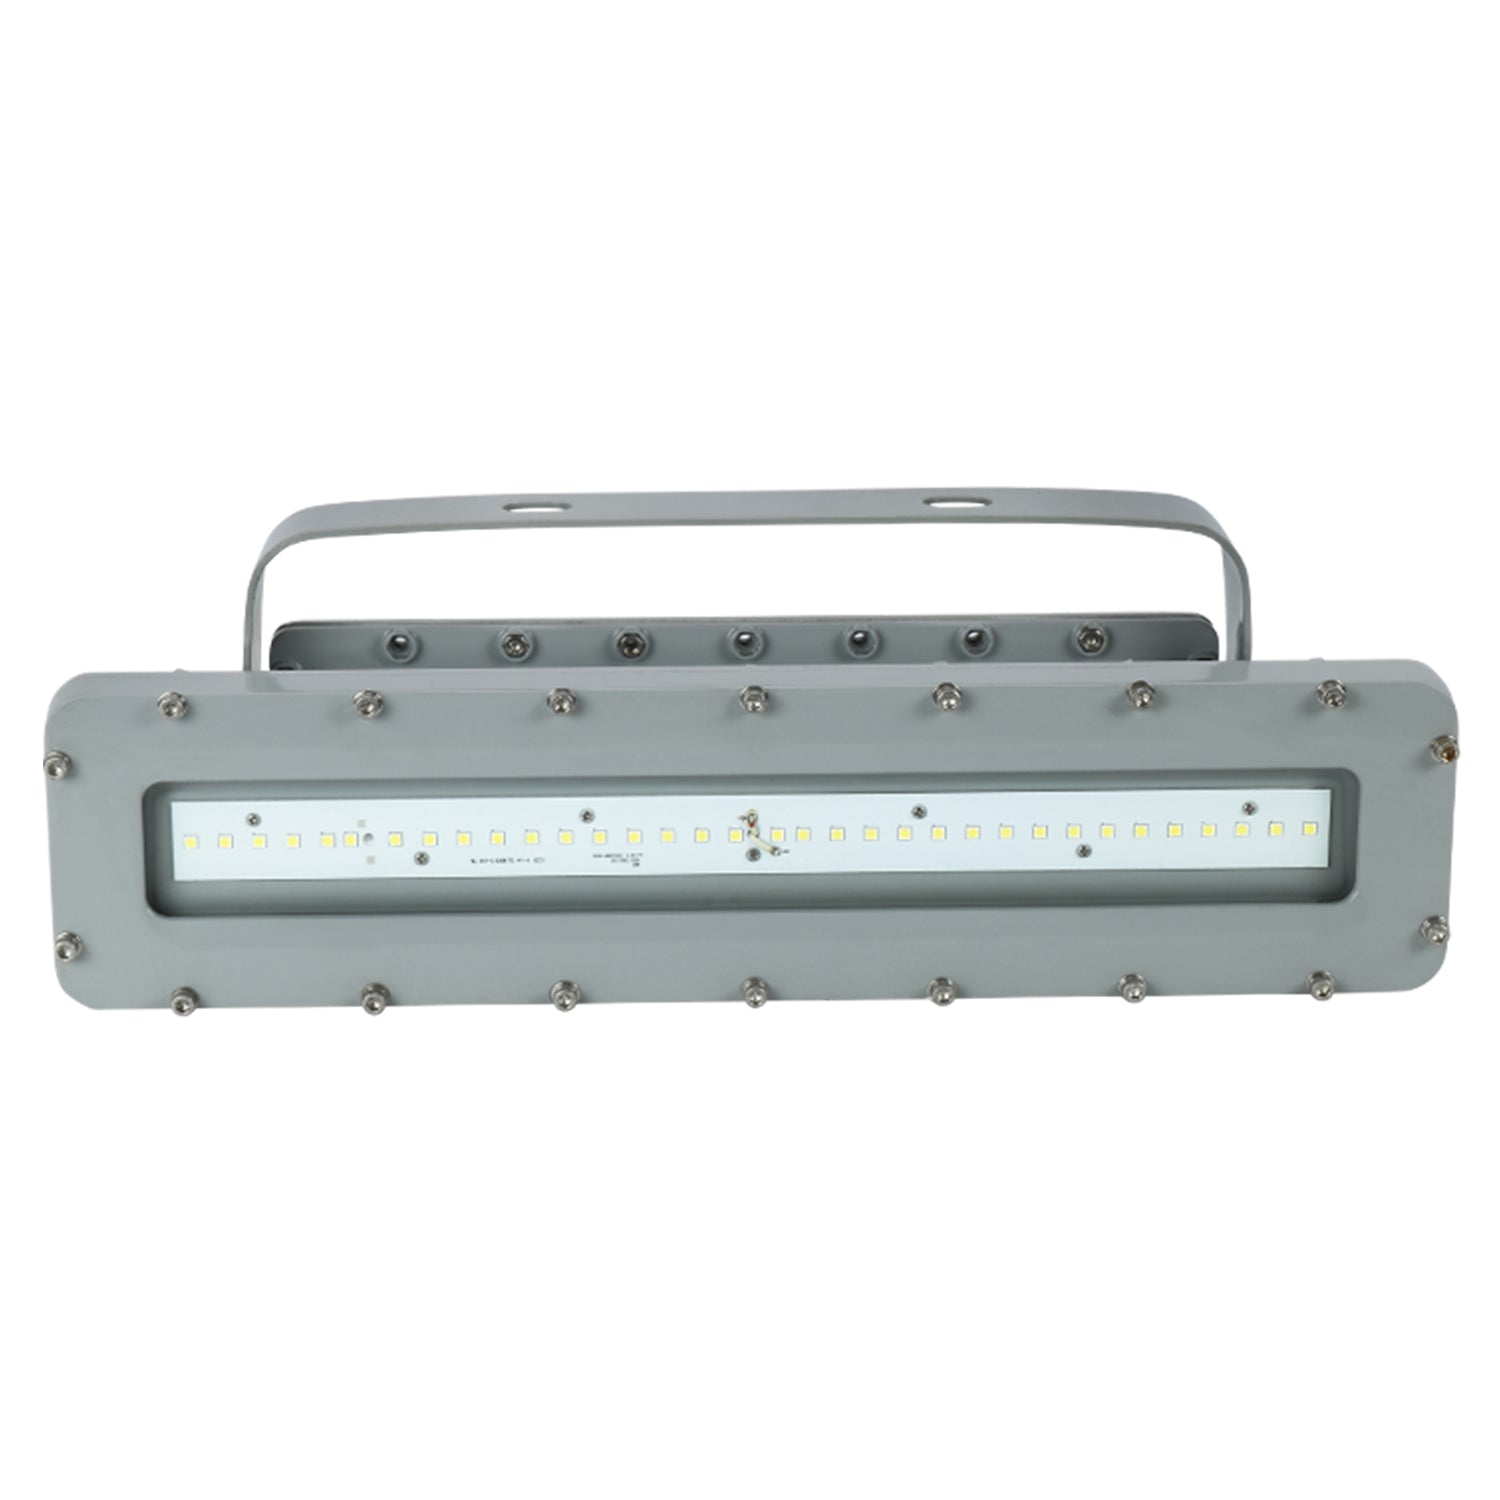 I Series 80W Dimmable LED Explosion Proof Linear Light: Efficient and Reliable Lighting Solution for Hazardous Locations with 11200LM and IP66 Protection, Ideal for Industrial Environments